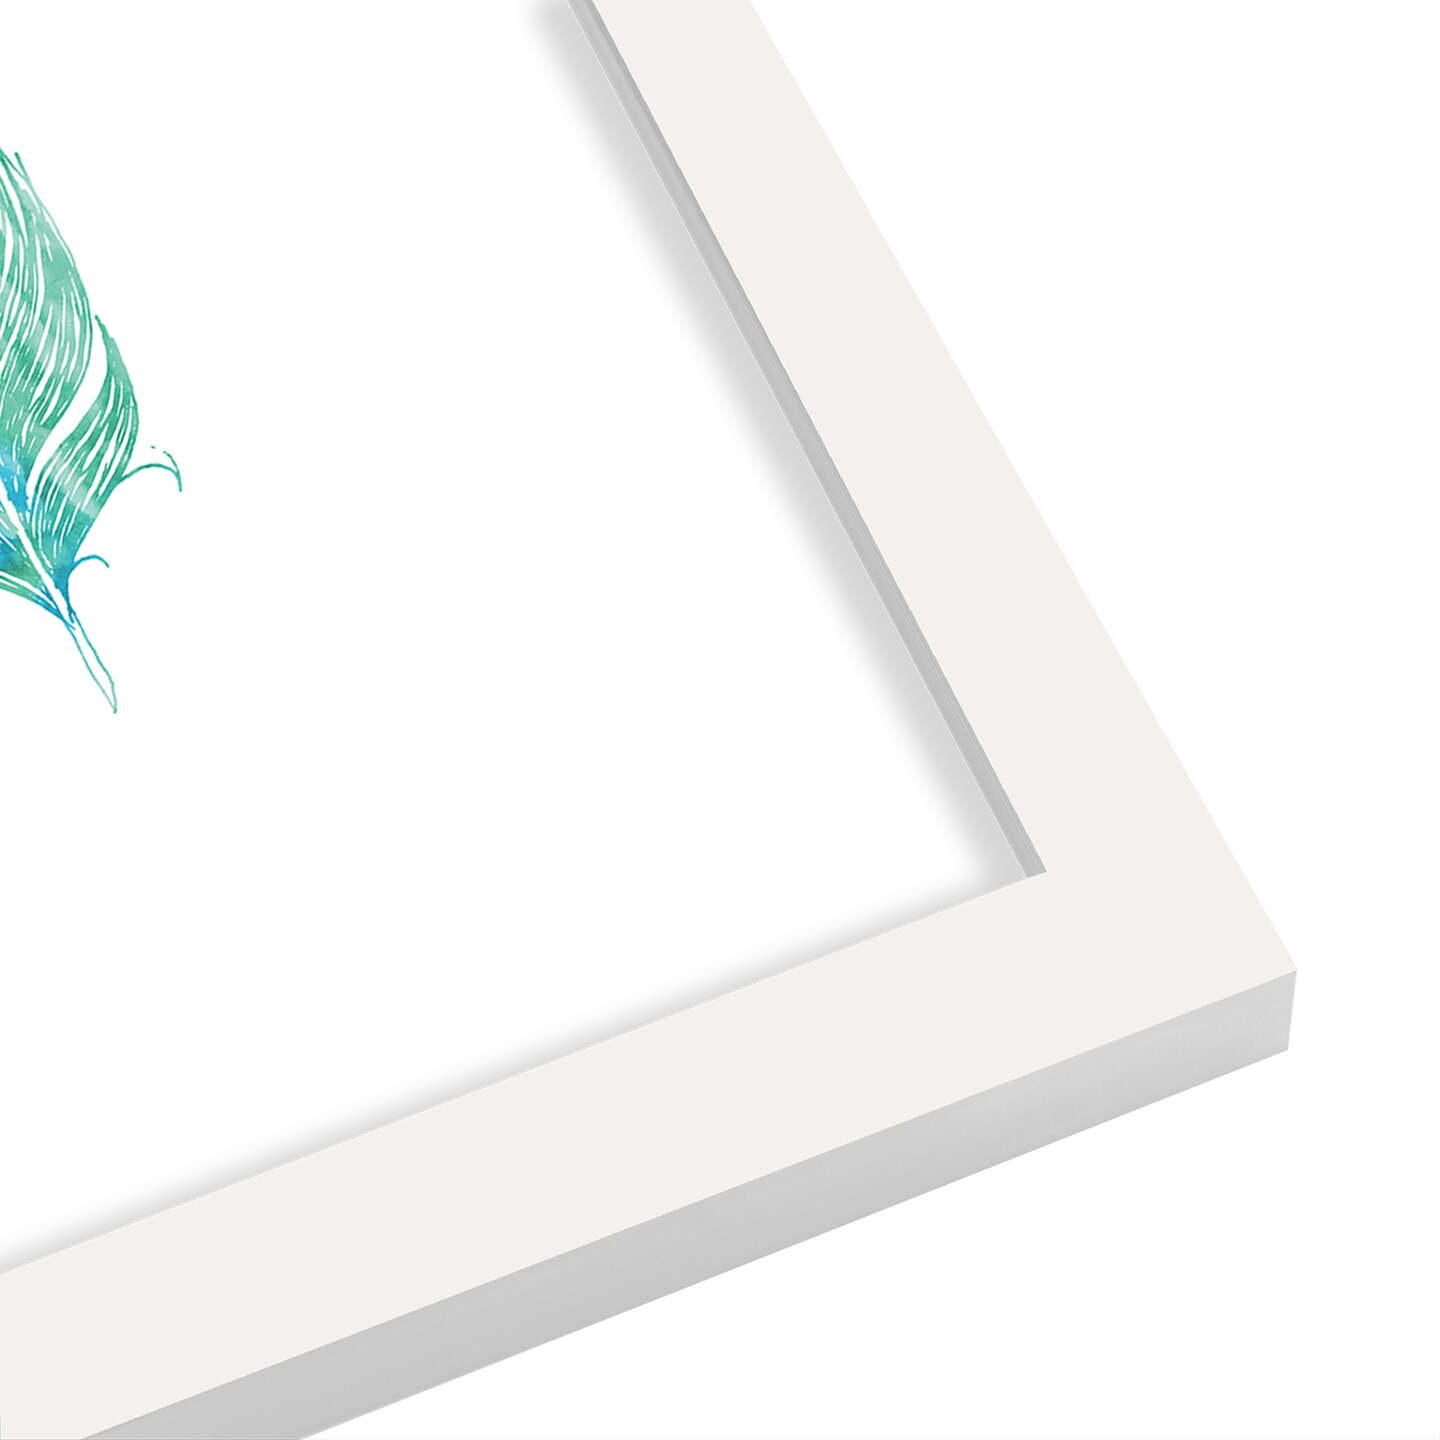 Green Feather by Wall + Wonder Frame  - Americanflat